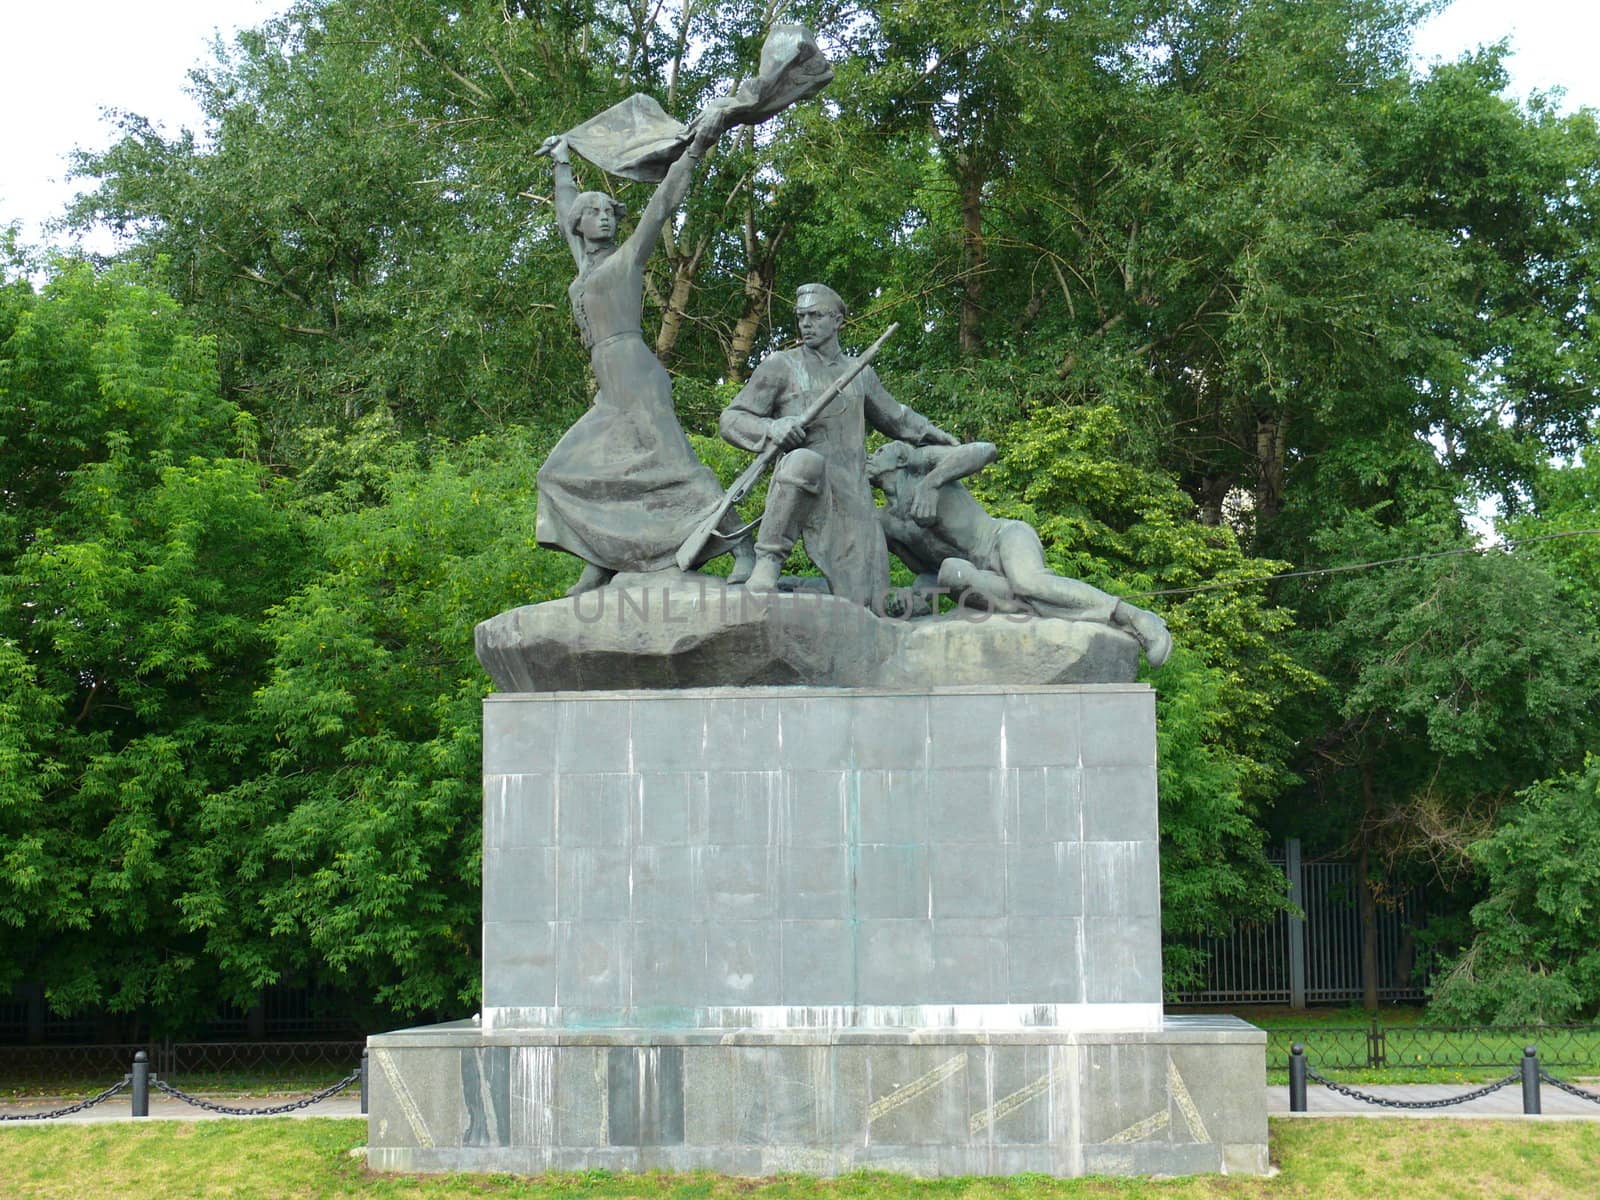 Monument to Barricade fighters in Krasnaya presnya - Moscow by Stoyanov